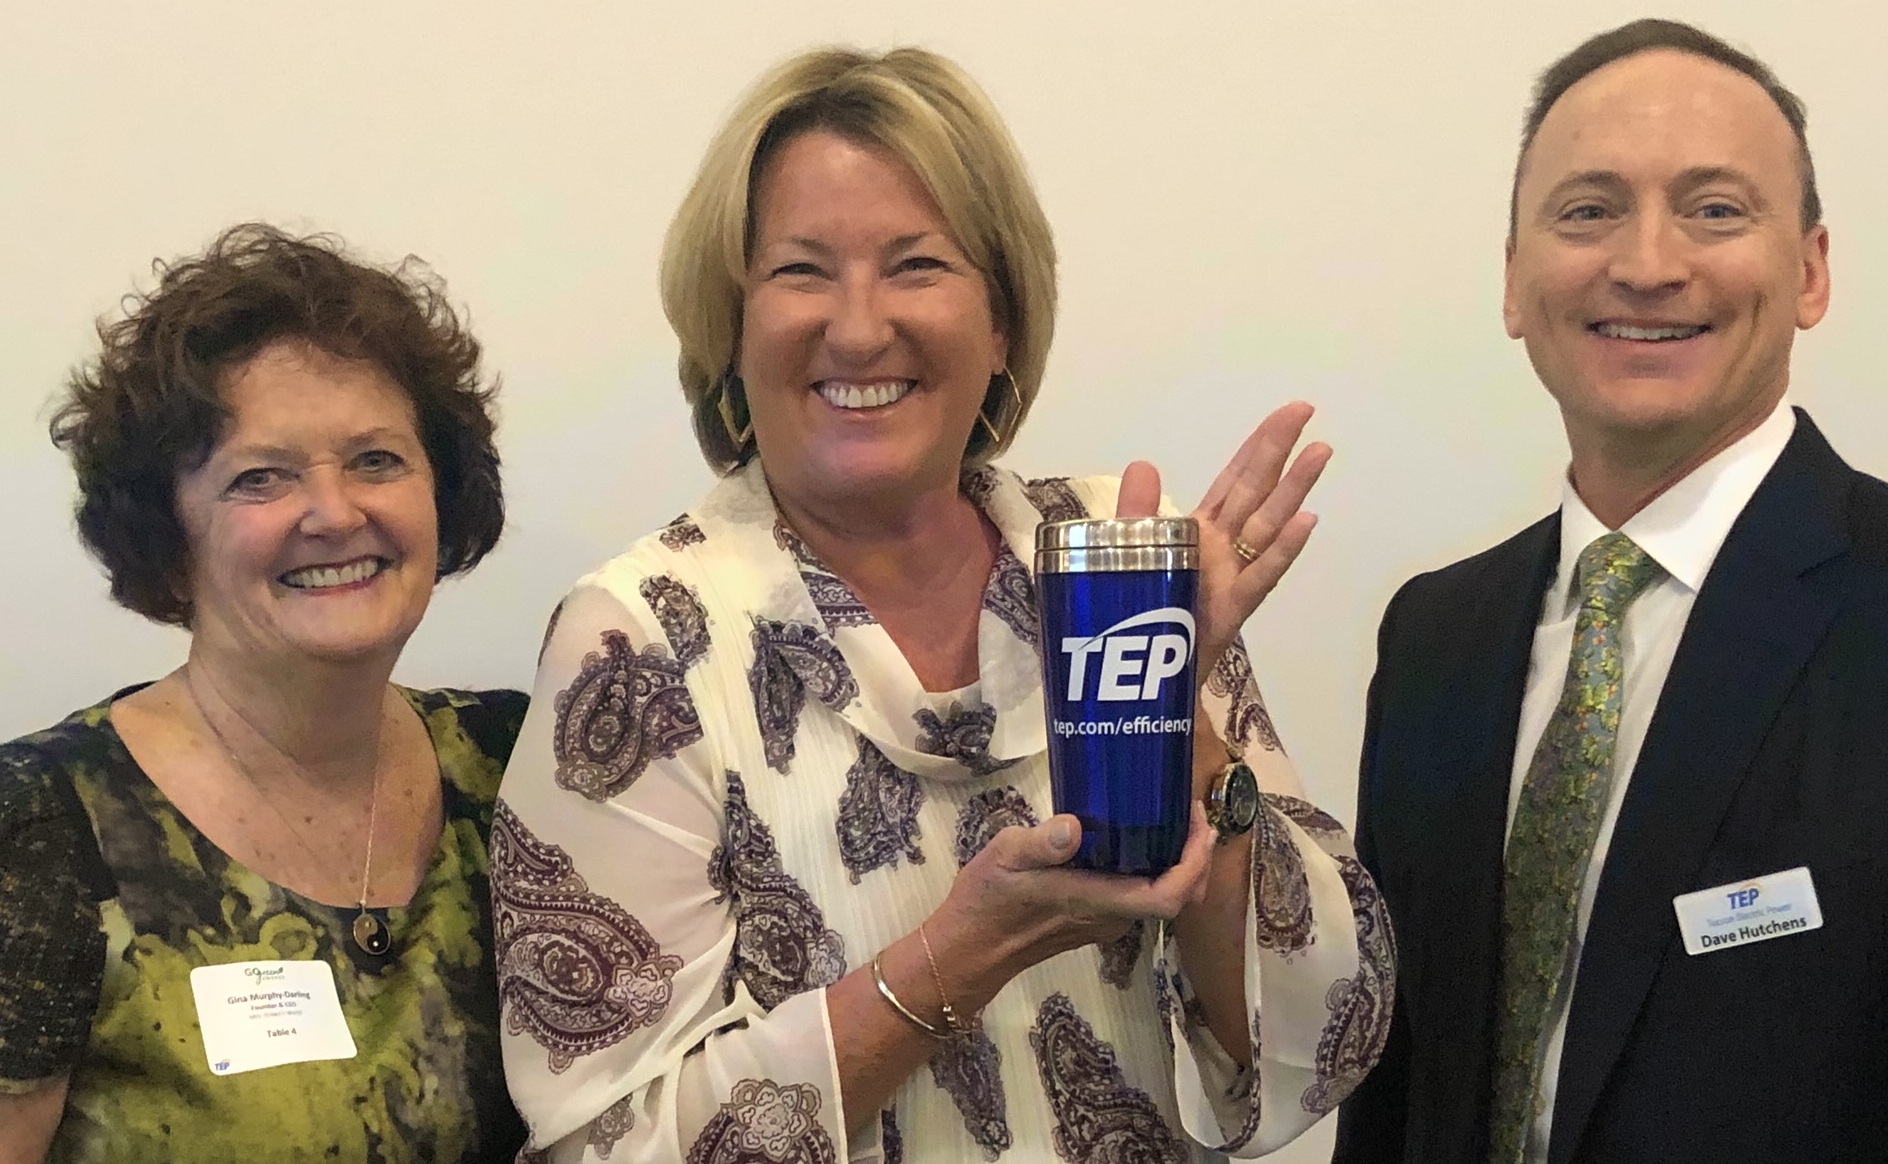 Gina Murphy-Darling (Mrs. Green), Catherine E. Ries. Vice President, Customer and Human Resources TEP, David Hutchens, President and Chief Executive Officer, TEP